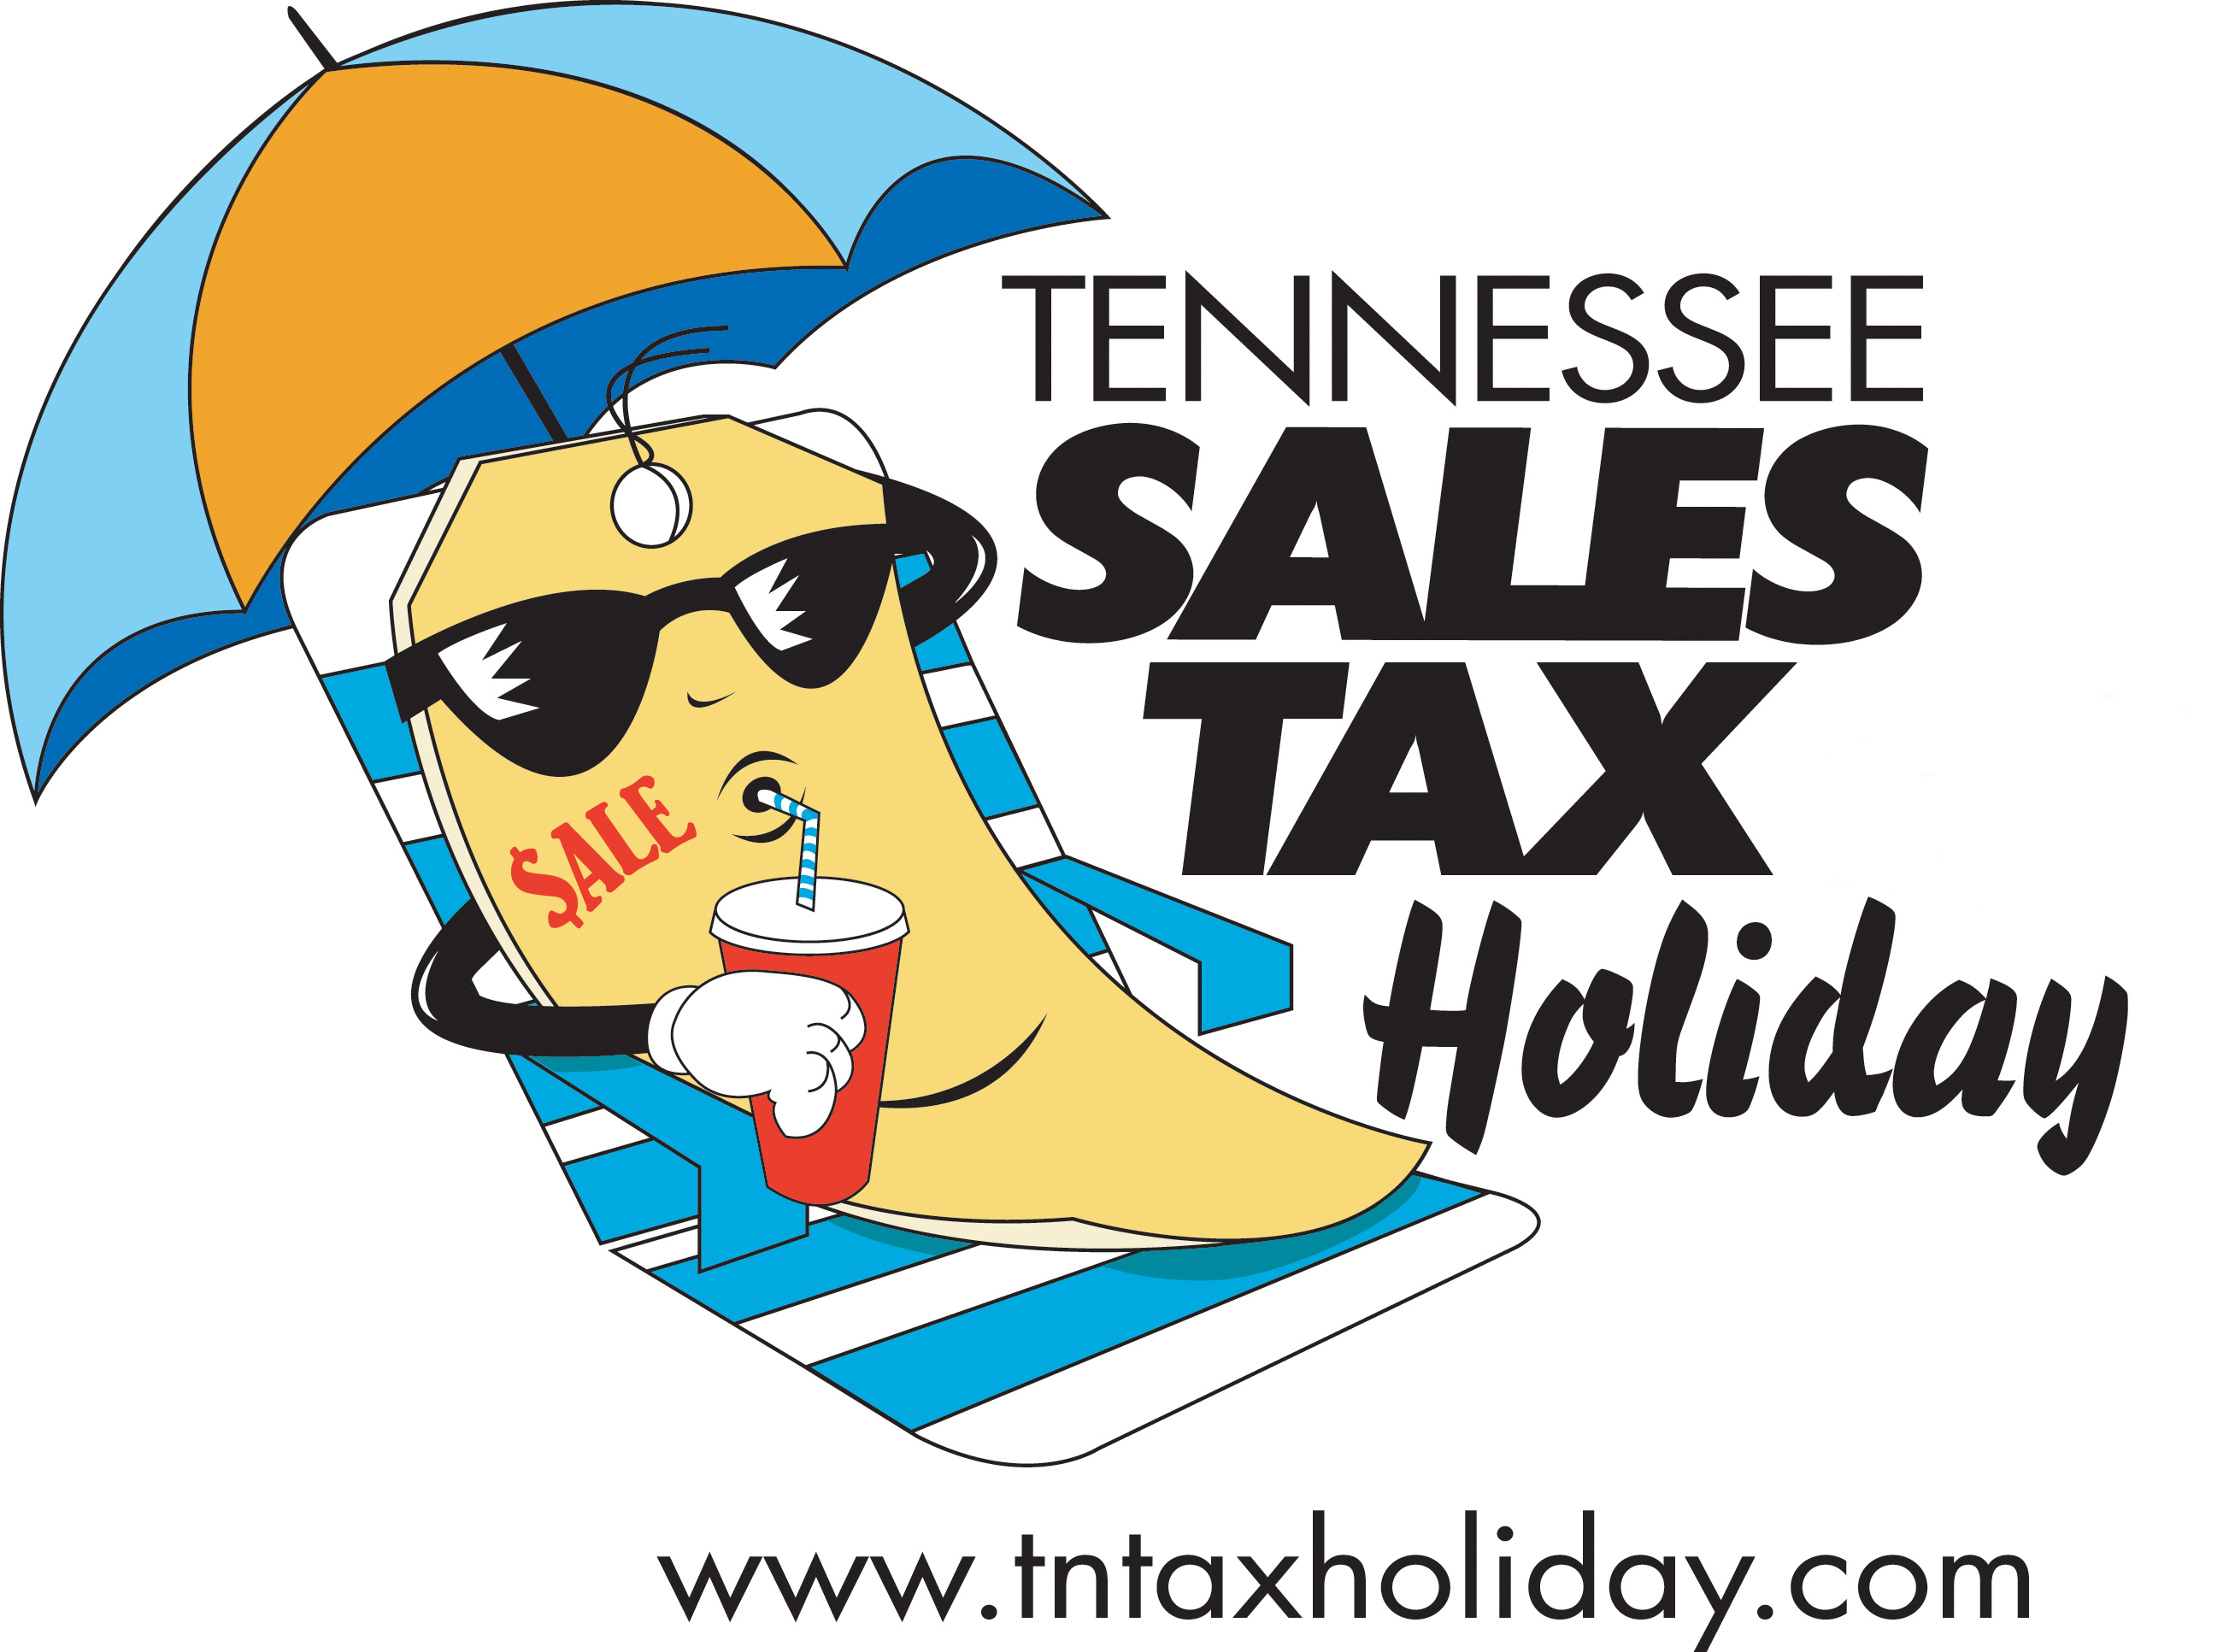 2013 Tax Free Weekend in Tennessee